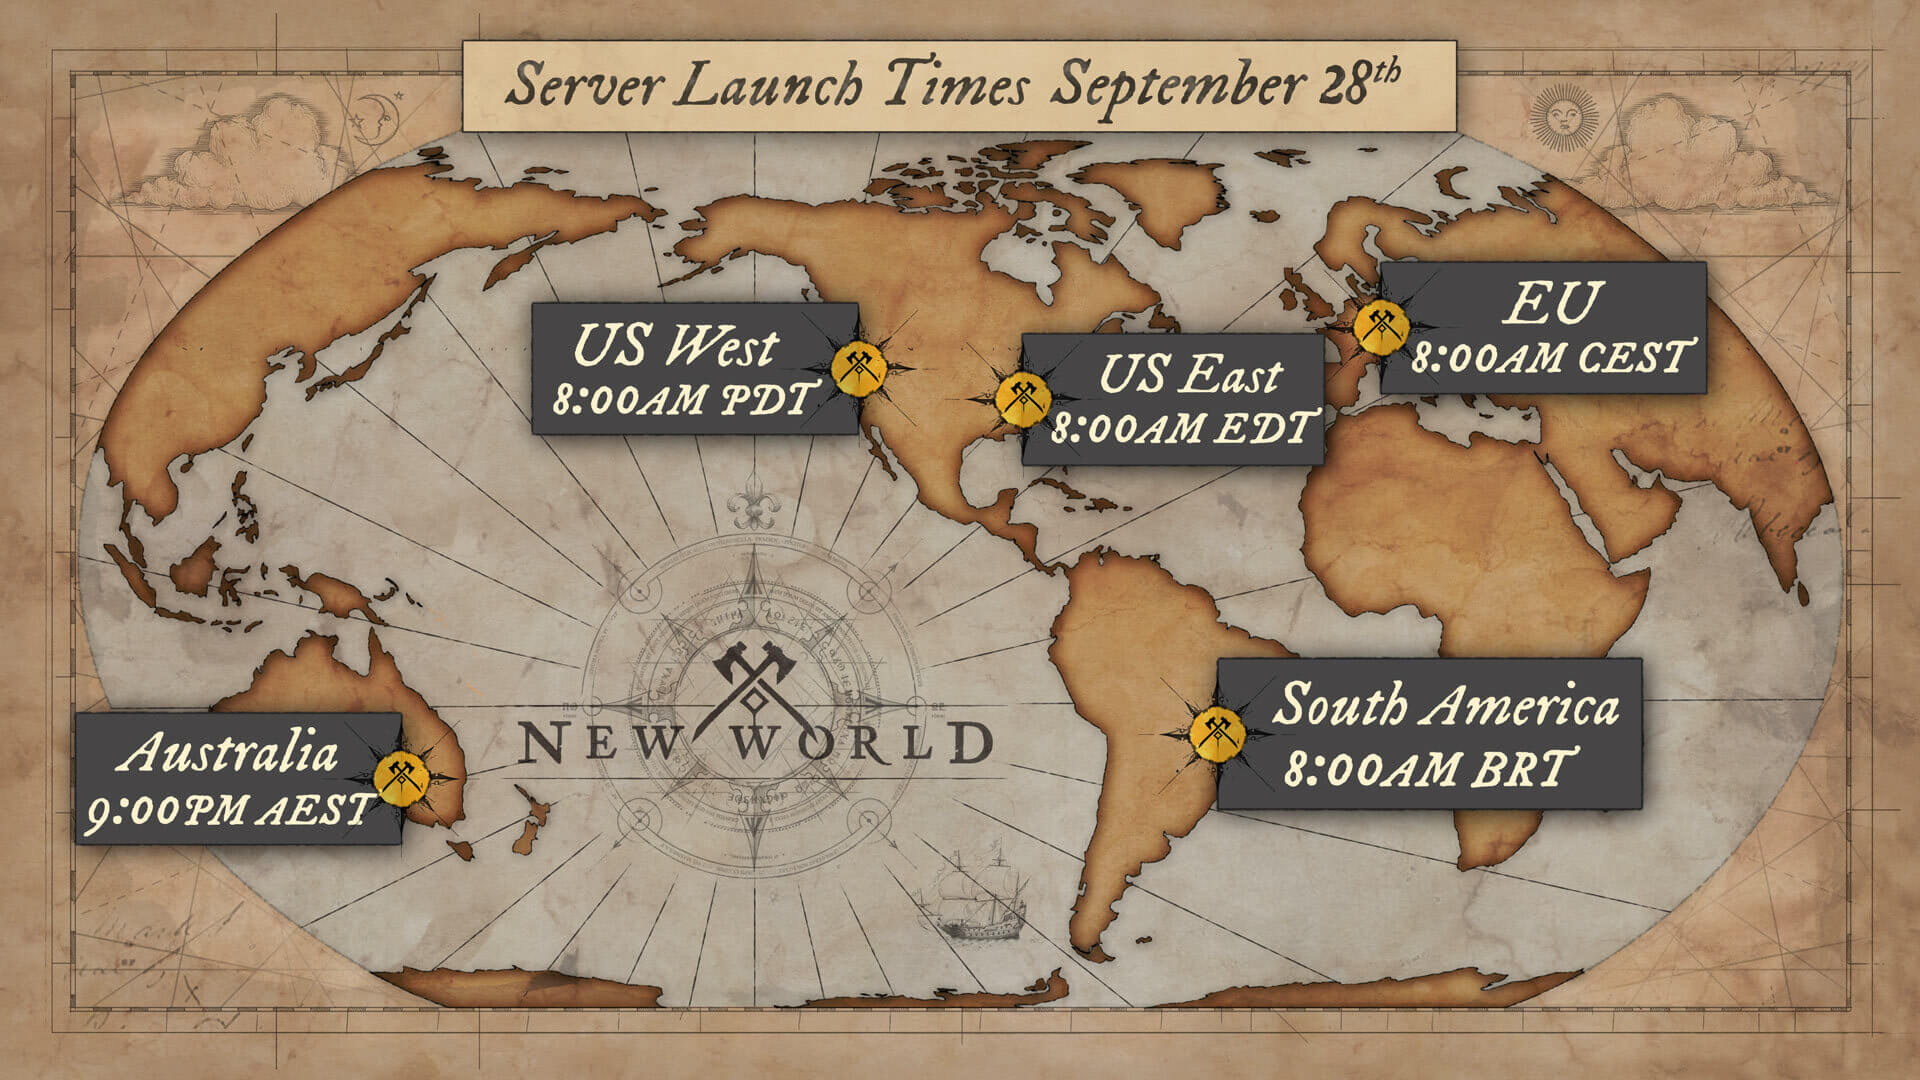 A map of worldwide launch times for New World